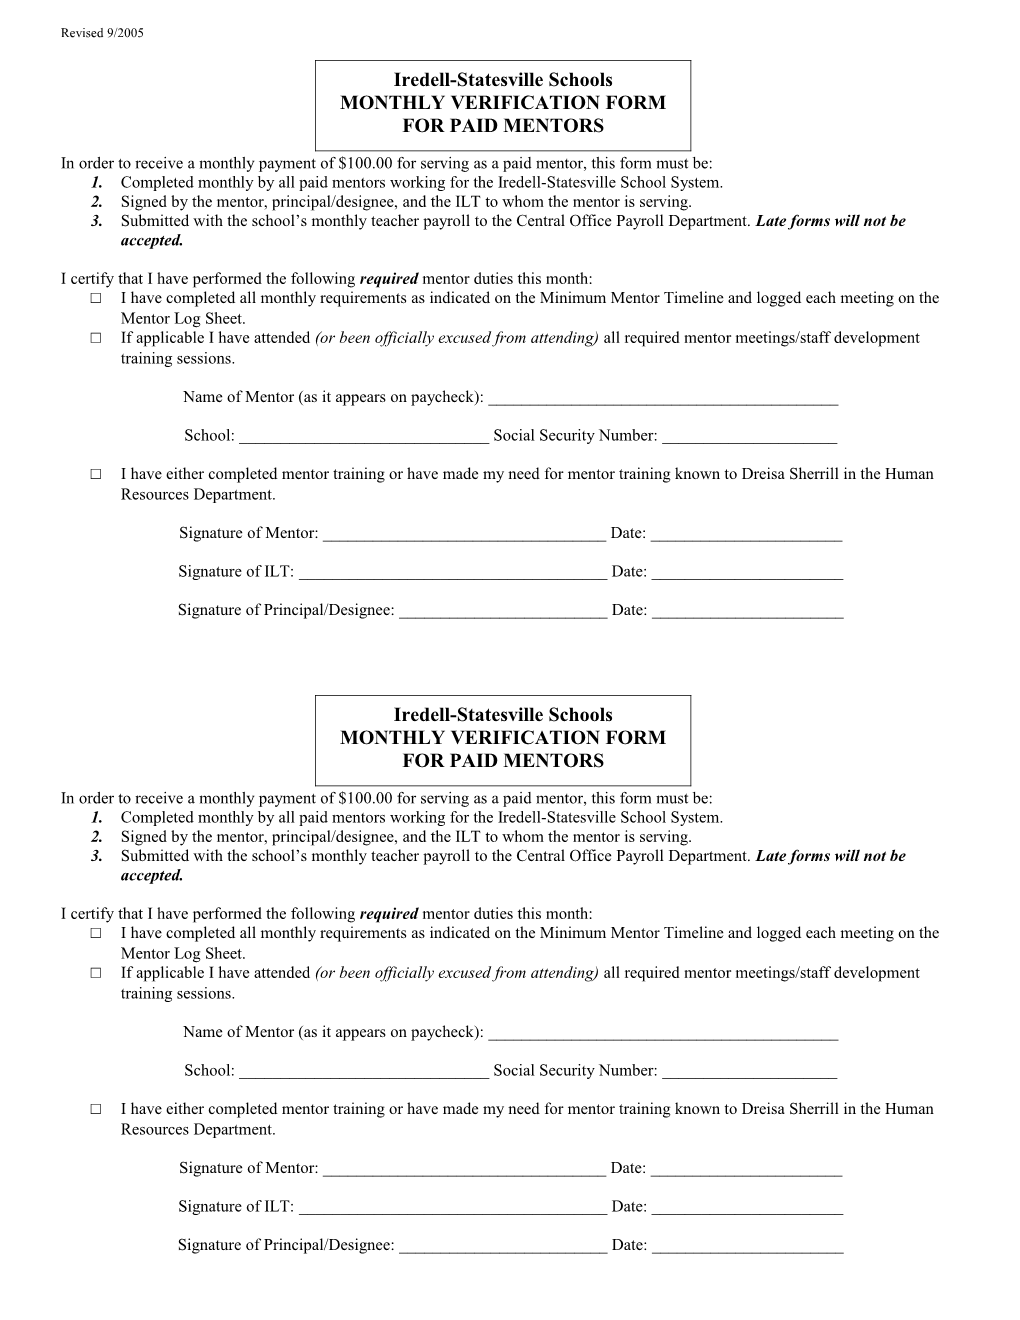 In Order to Receive a Monthly Payment of $100.00 for Serving As a Paid Mentor, This Form